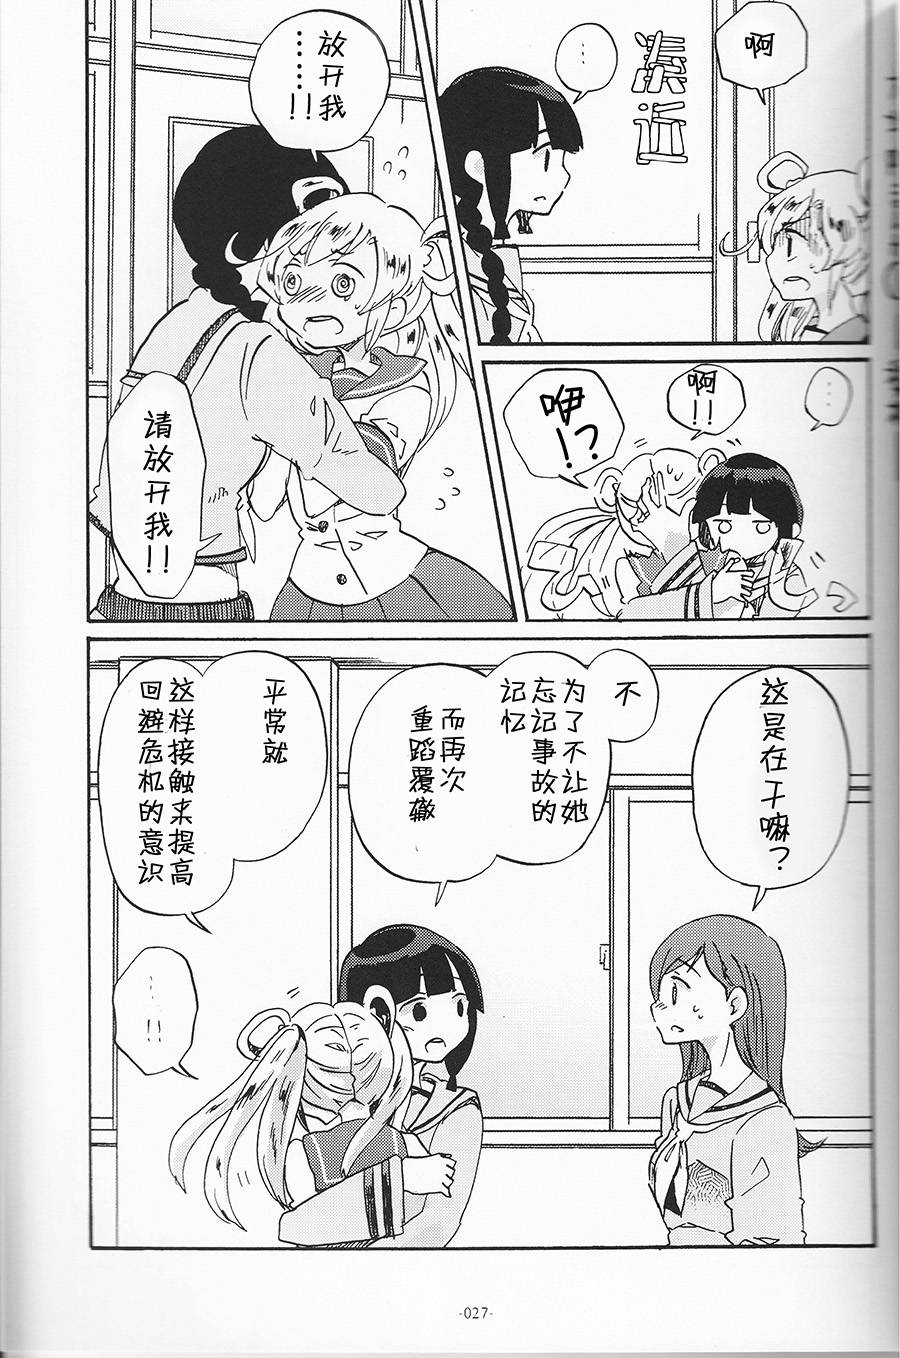 【t pases on good terms every day】漫画-（全一话）章节漫画下拉式图片-20.jpg